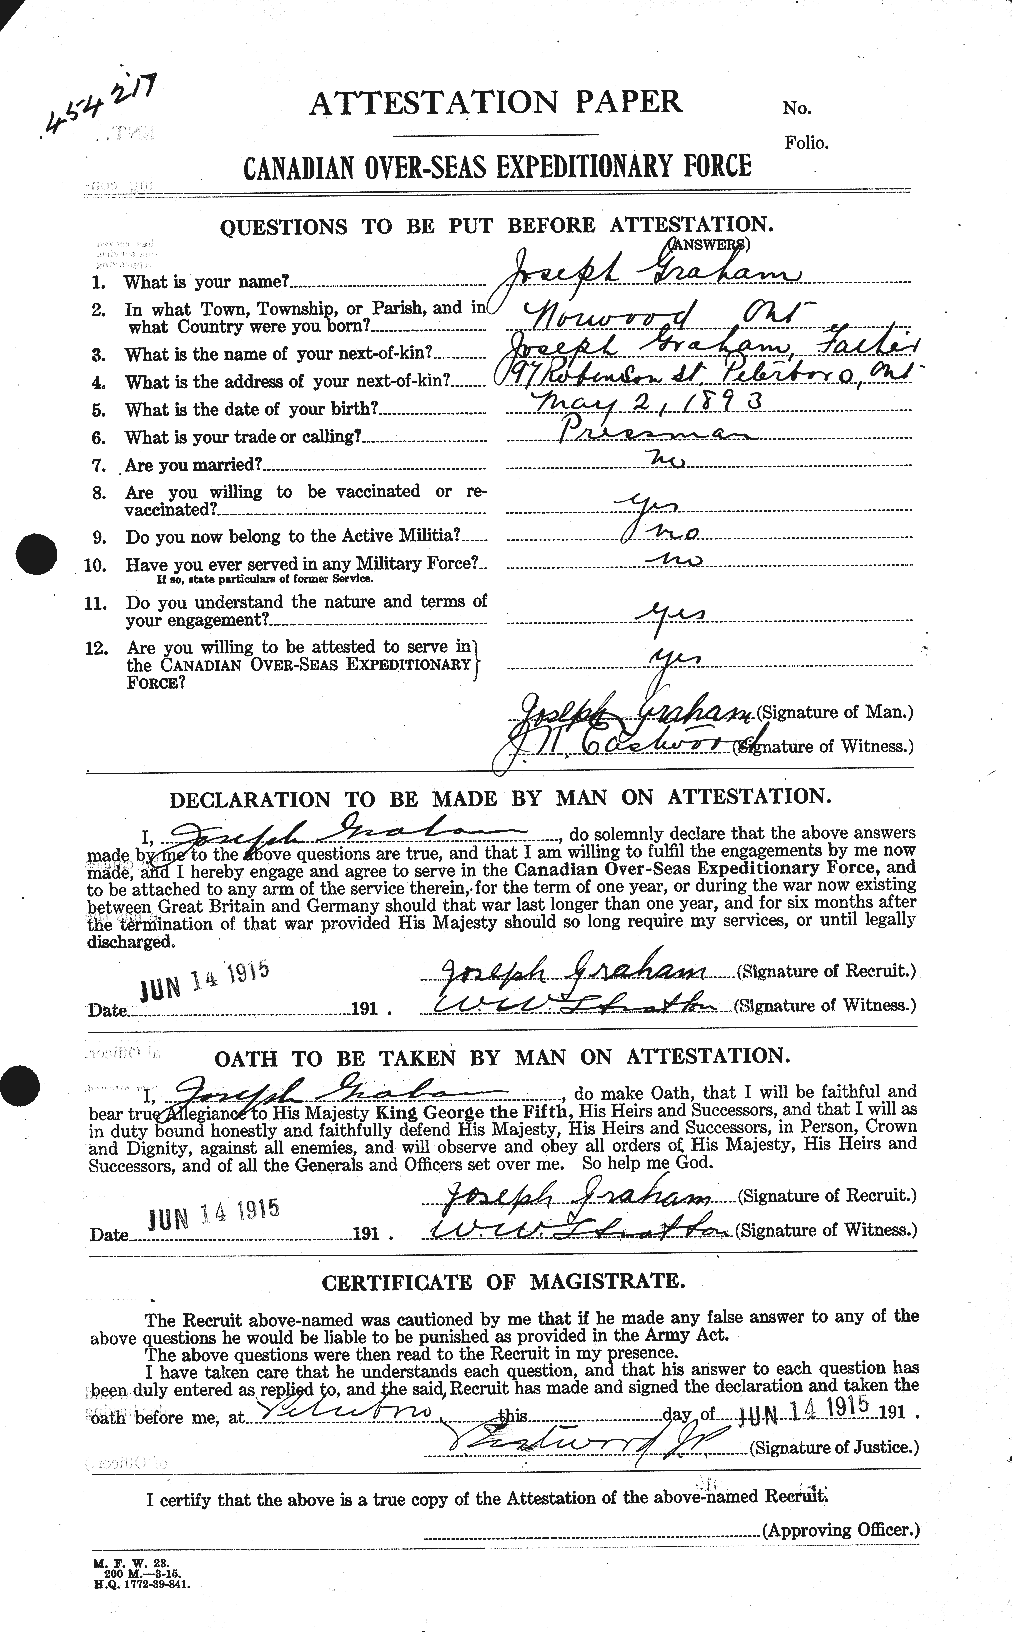 Personnel Records of the First World War - CEF 359227a